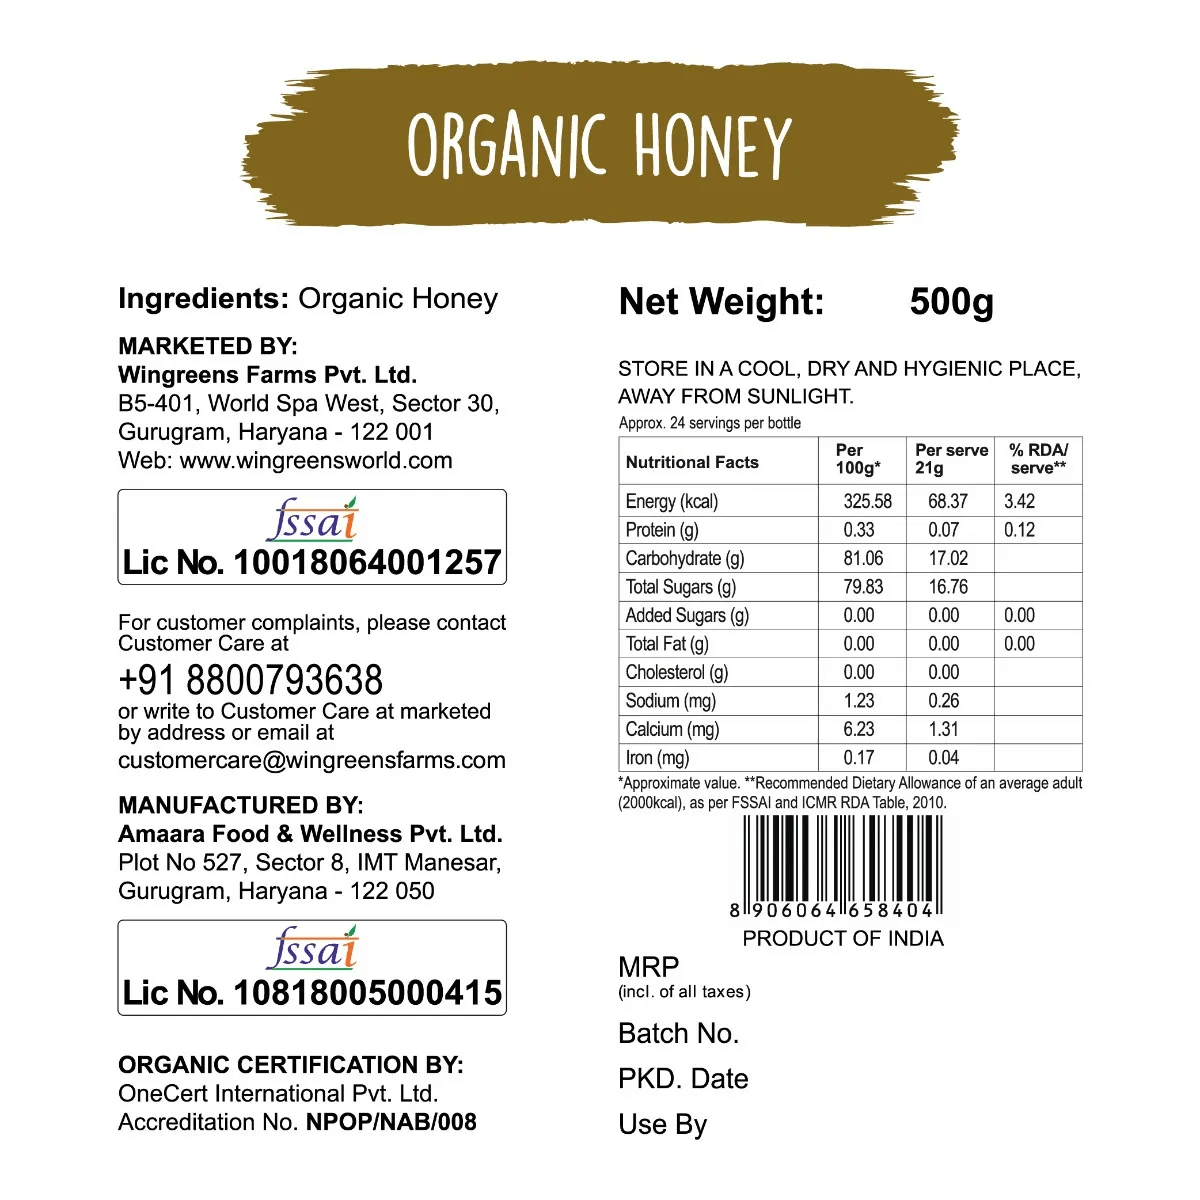 org honey nutrition facts